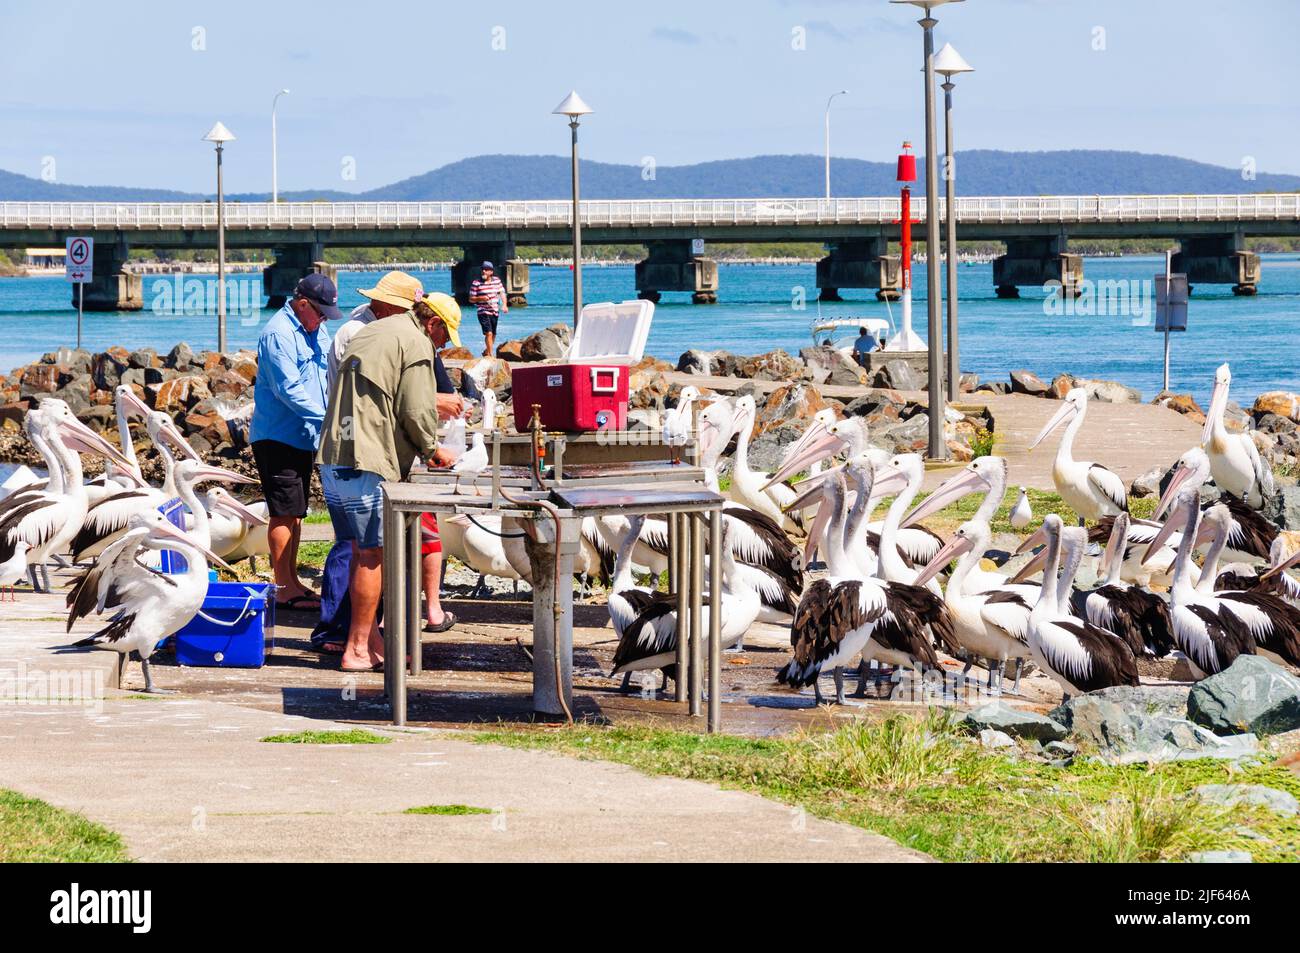 Hungry pelicans and seagulls wait for leftovers from fishermen cleaning fish - Forster, NSW, Australia Stock Photo